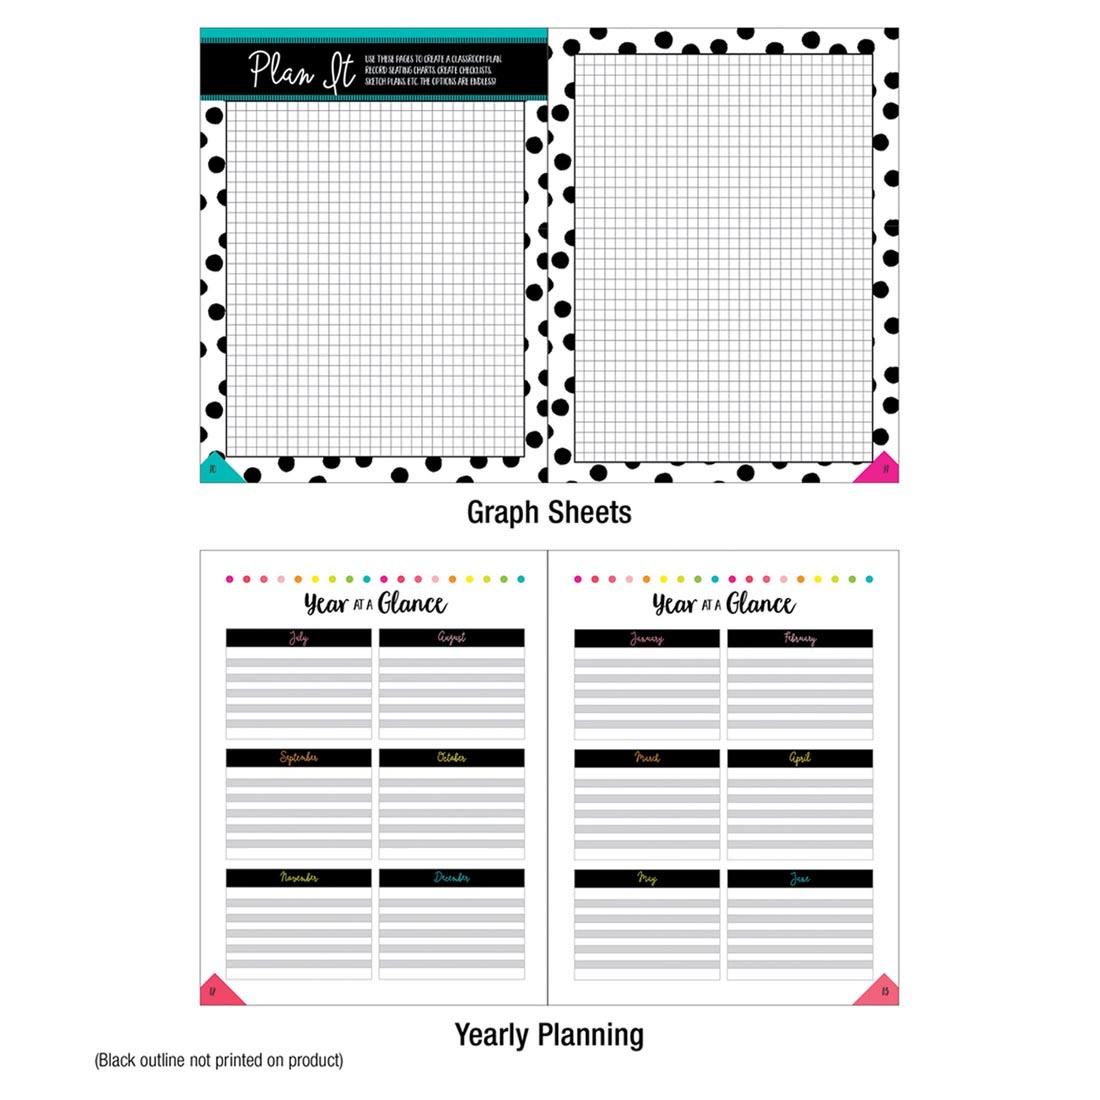 Graph Sheets and Yearly Planning Pages from Simply Stylish Tropical Pineapple Teacher Planner